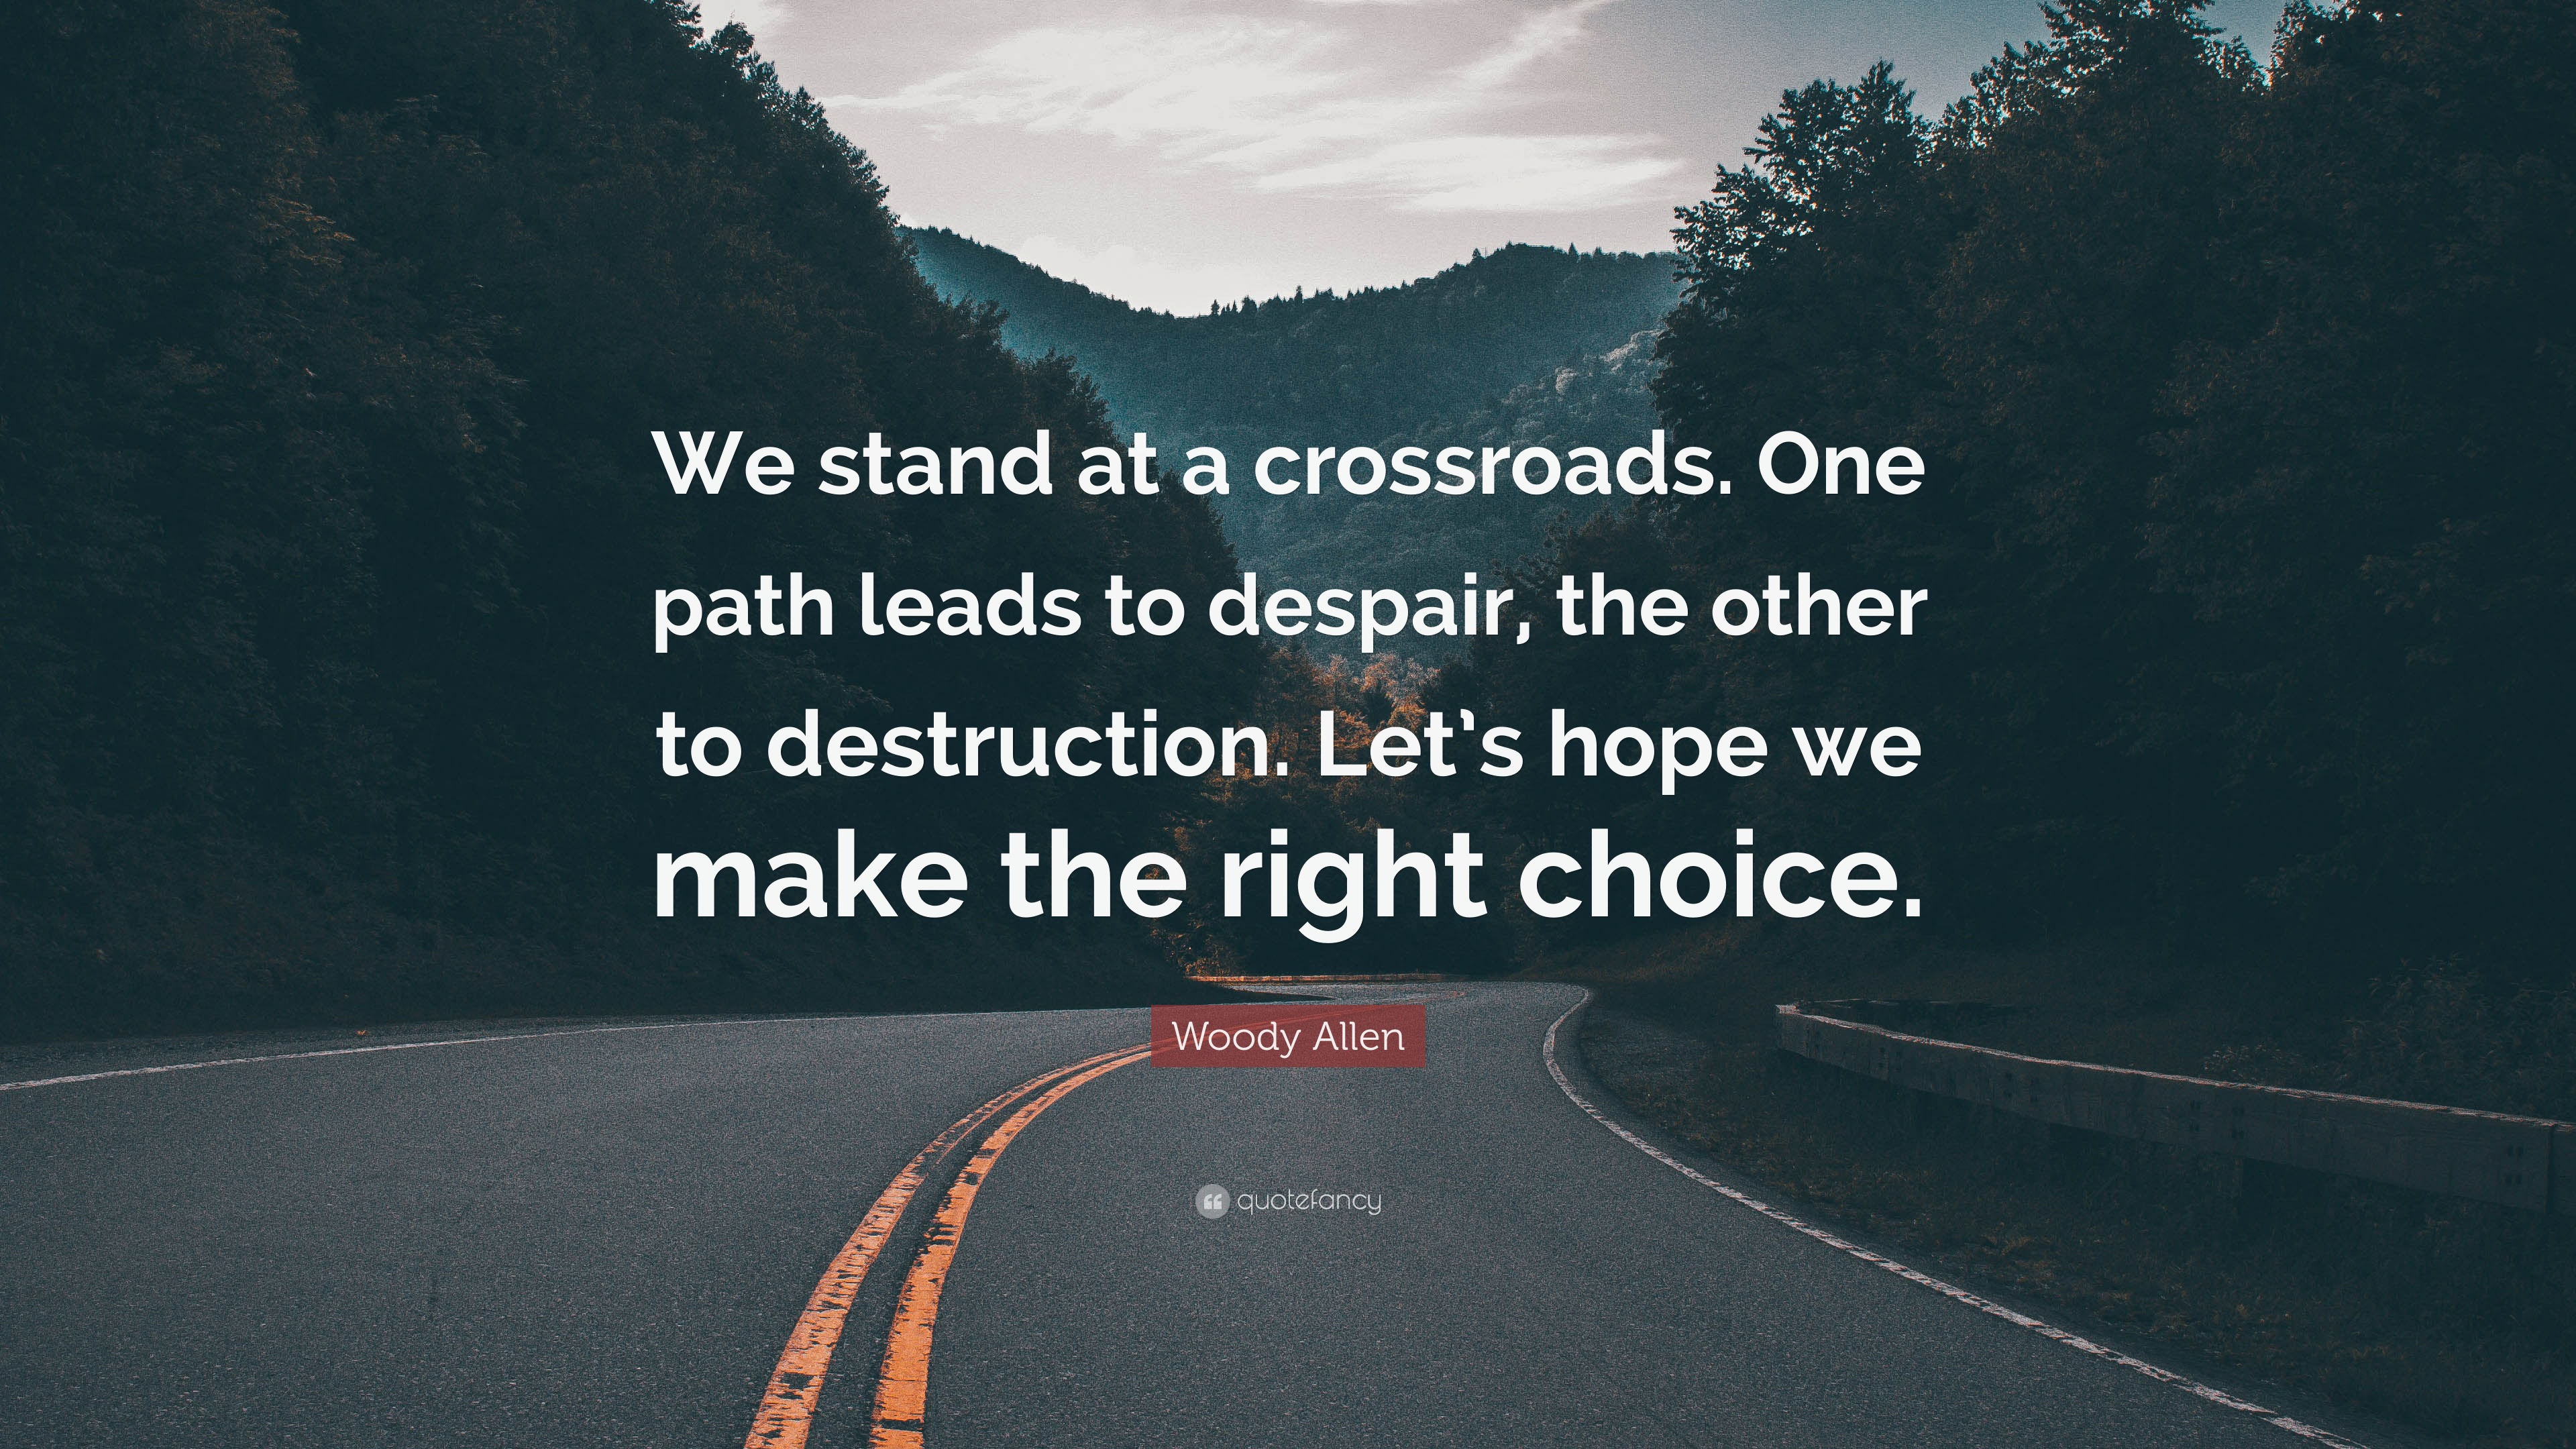 Woody Allen Quote: “We stand at a crossroads. One path leads to